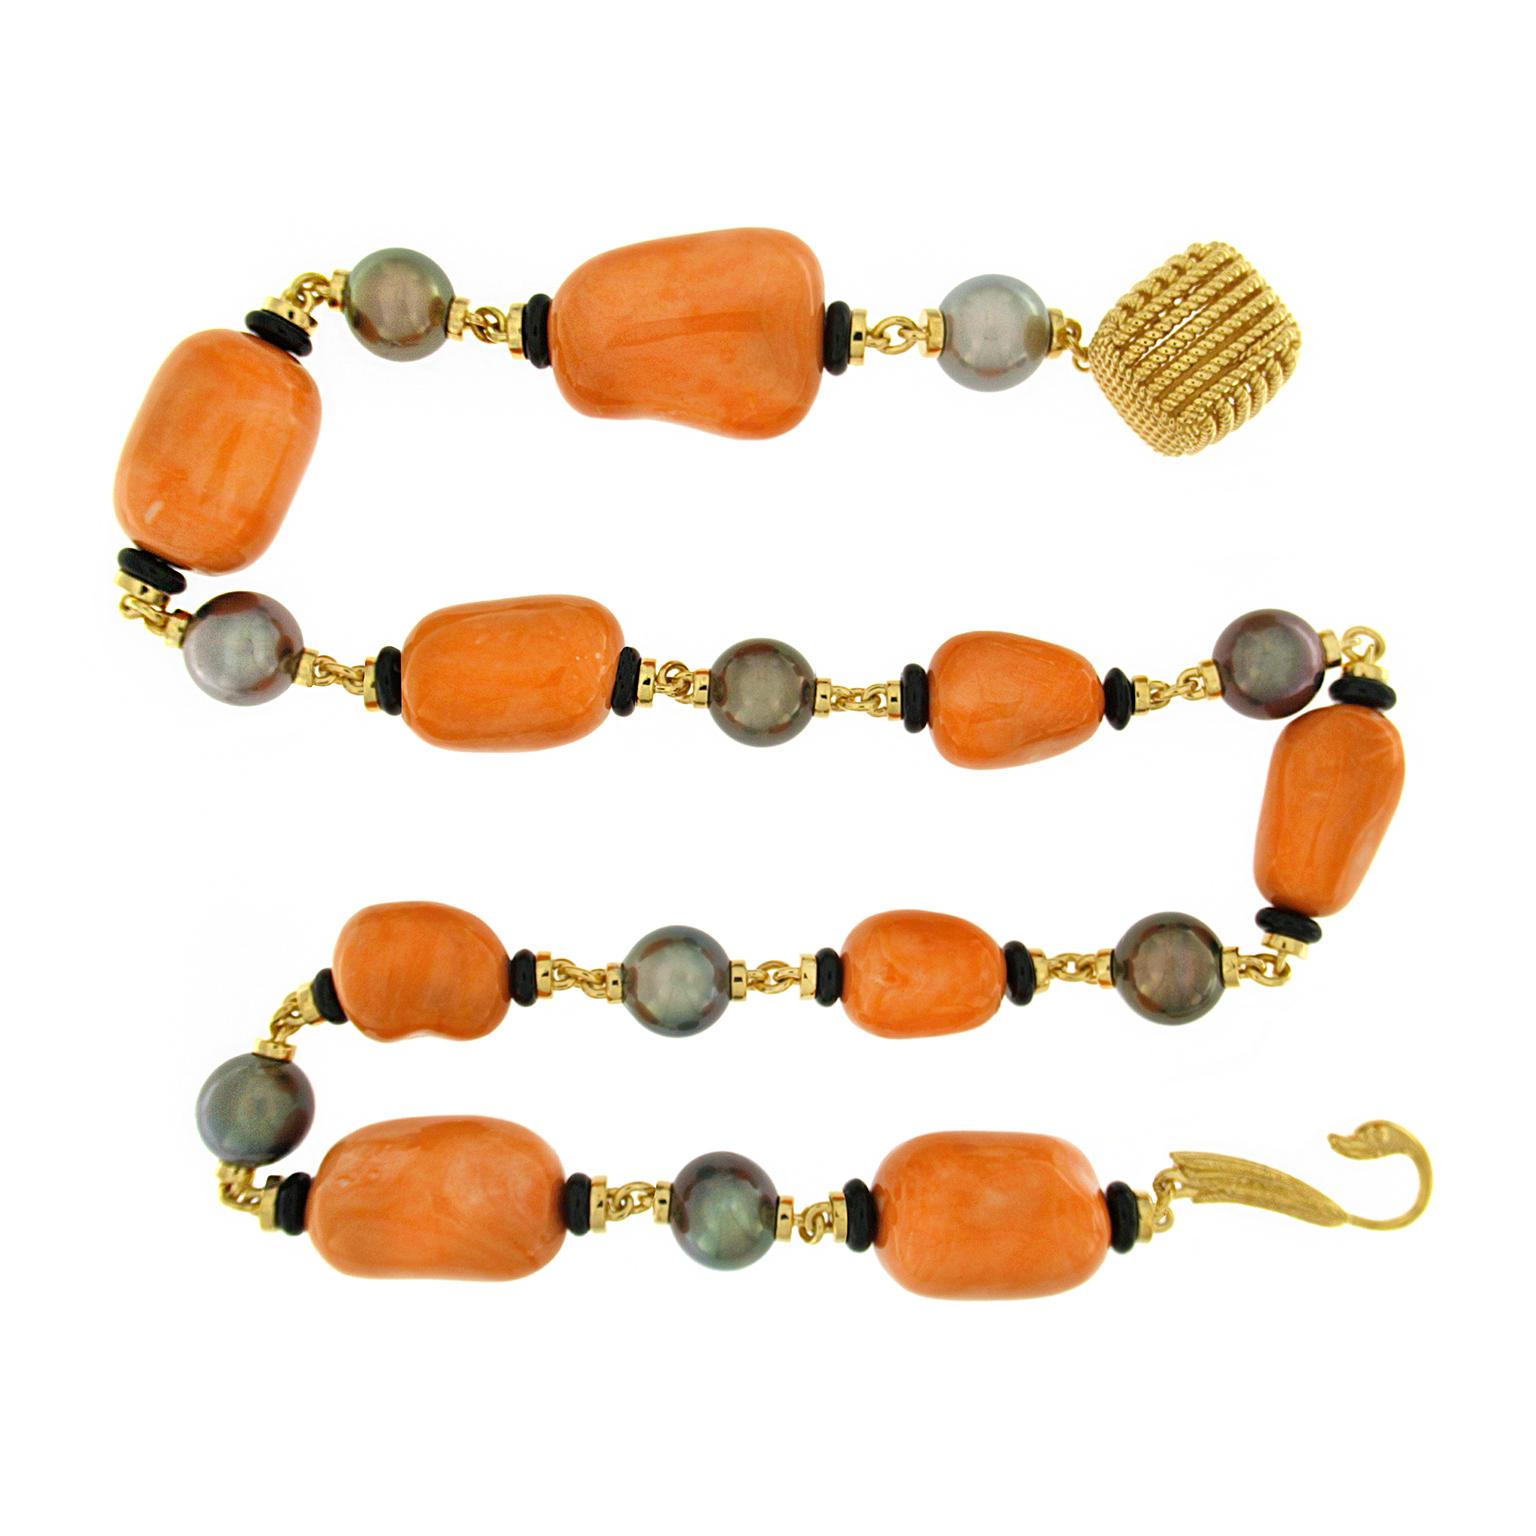 Coral and pearls join together for this necklace. Vibrant baroque shaped salmon coral is showcased, with a roundel of black jade on each side to accentuate its hue. 18k yellow gold links secure a single round gray Tahitian pearl for prismatic